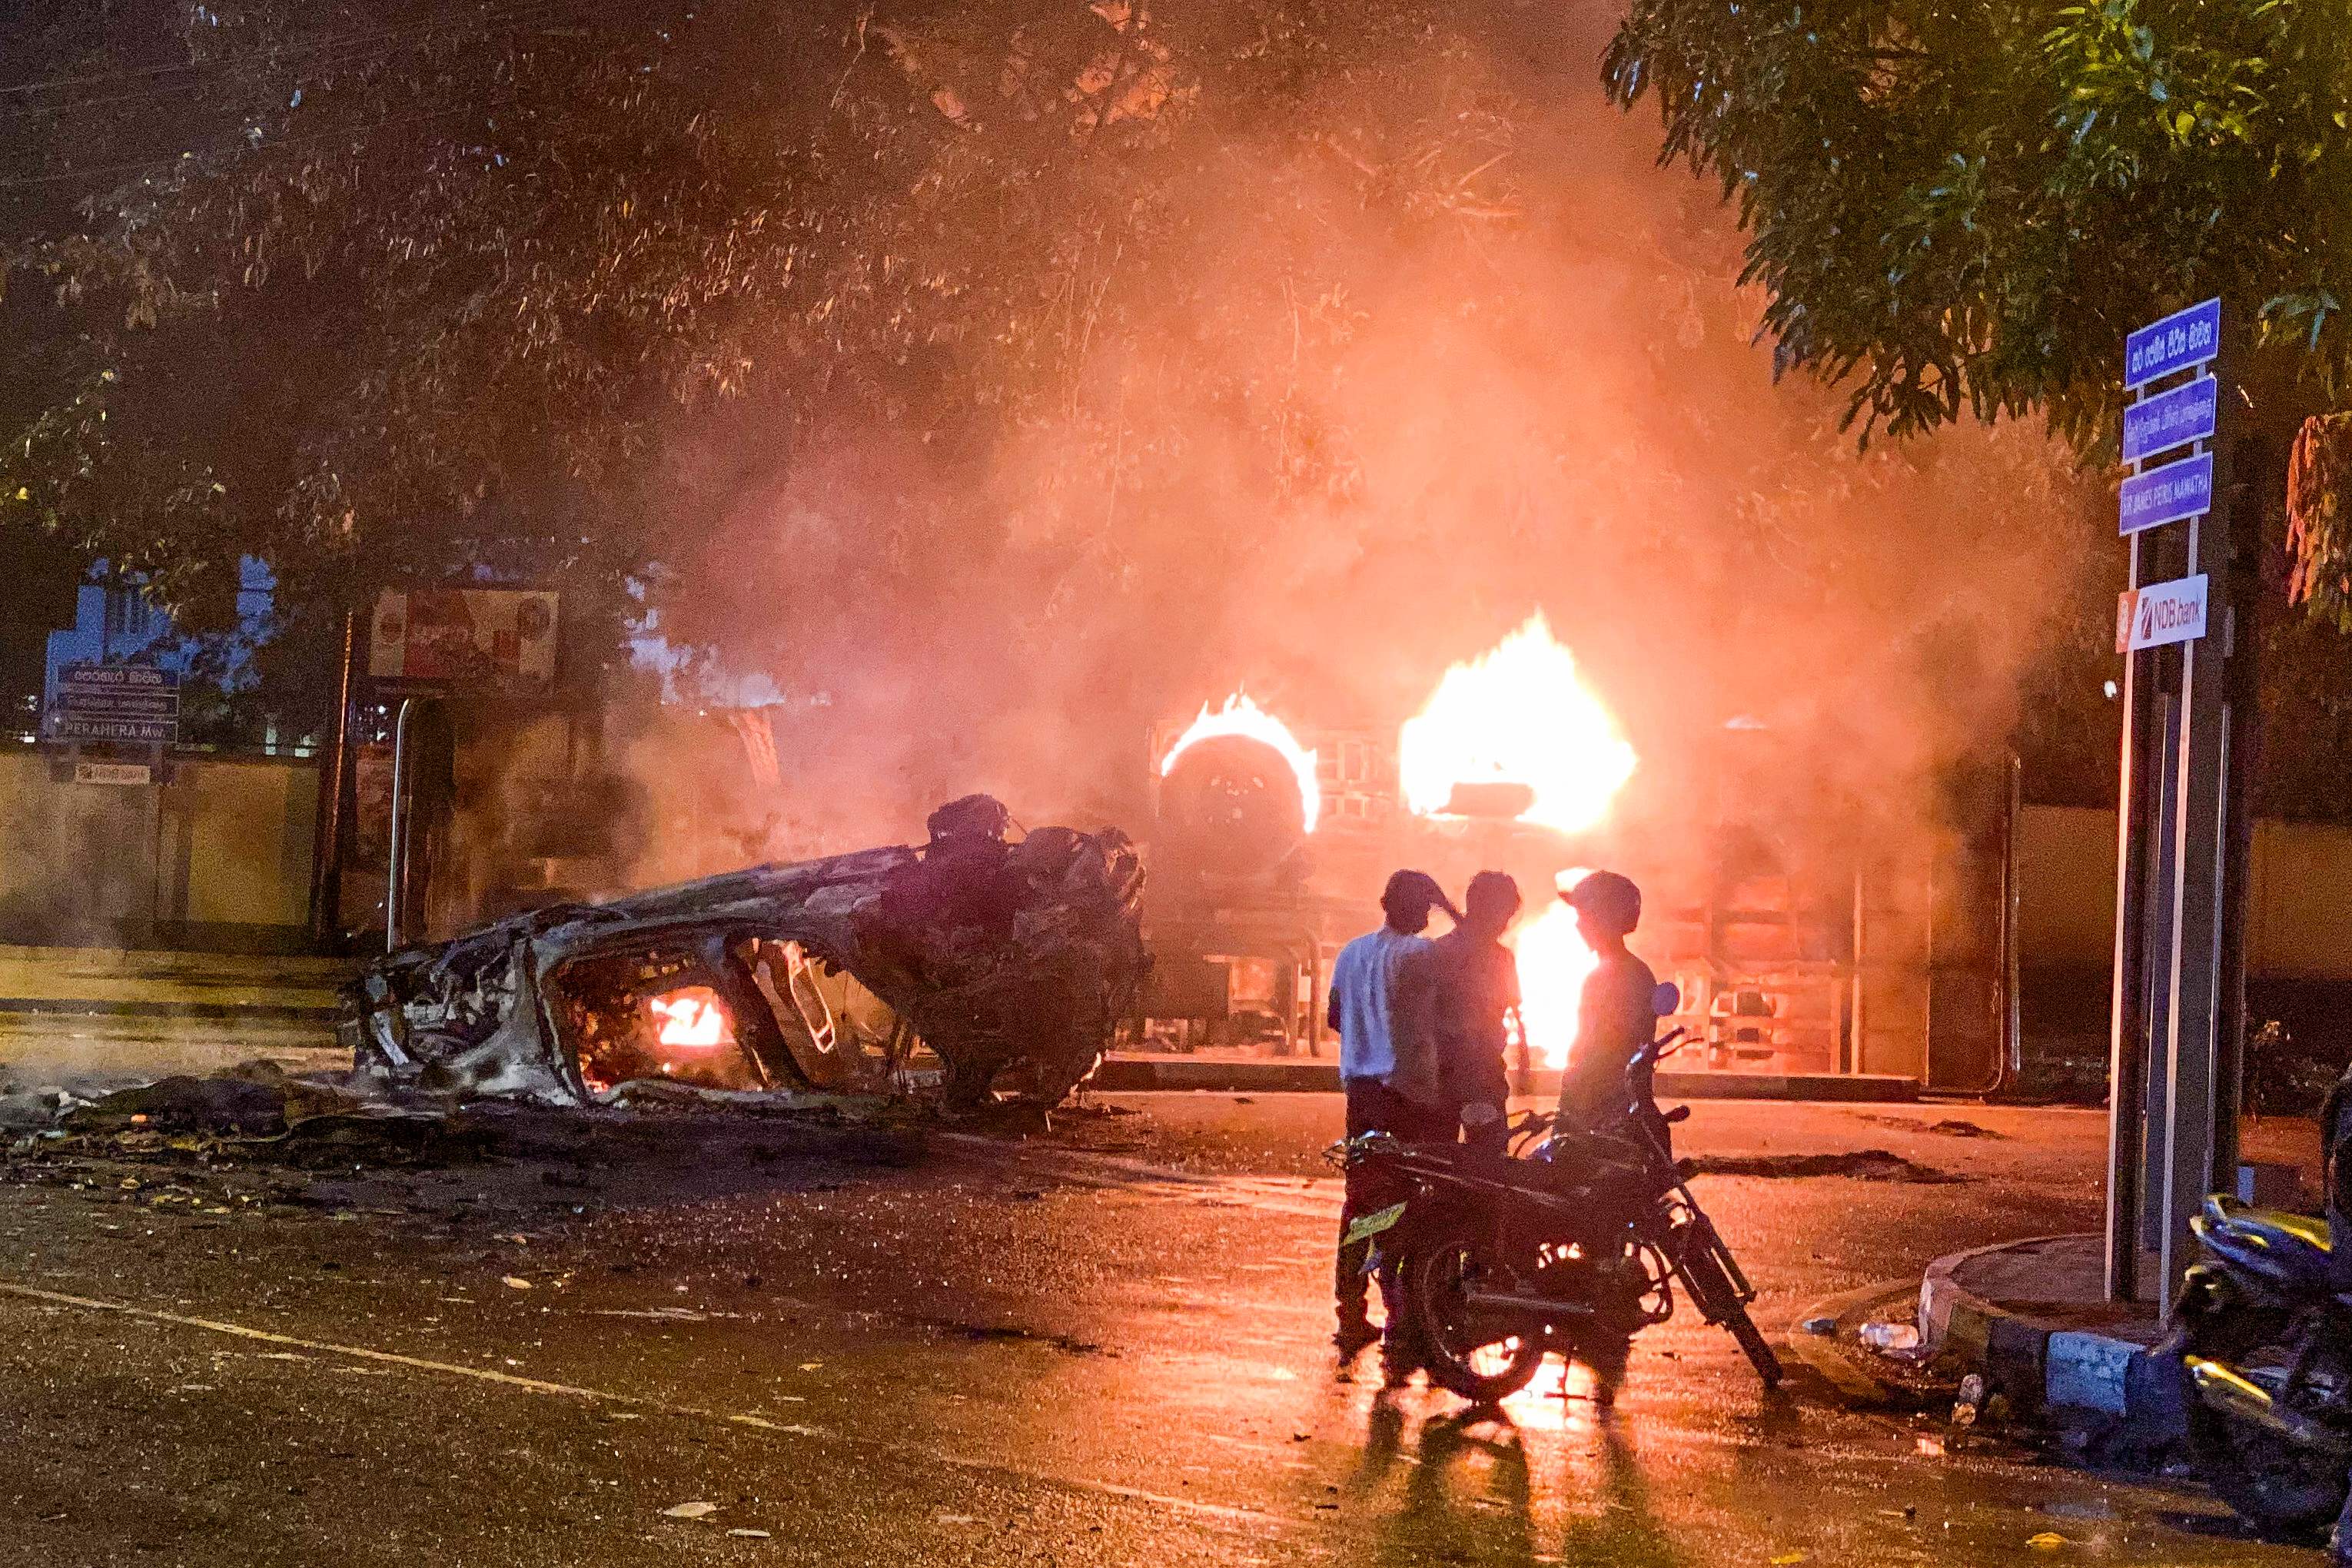 A vehicle belonging to security officials is set ablaze in Colombo on Monday night